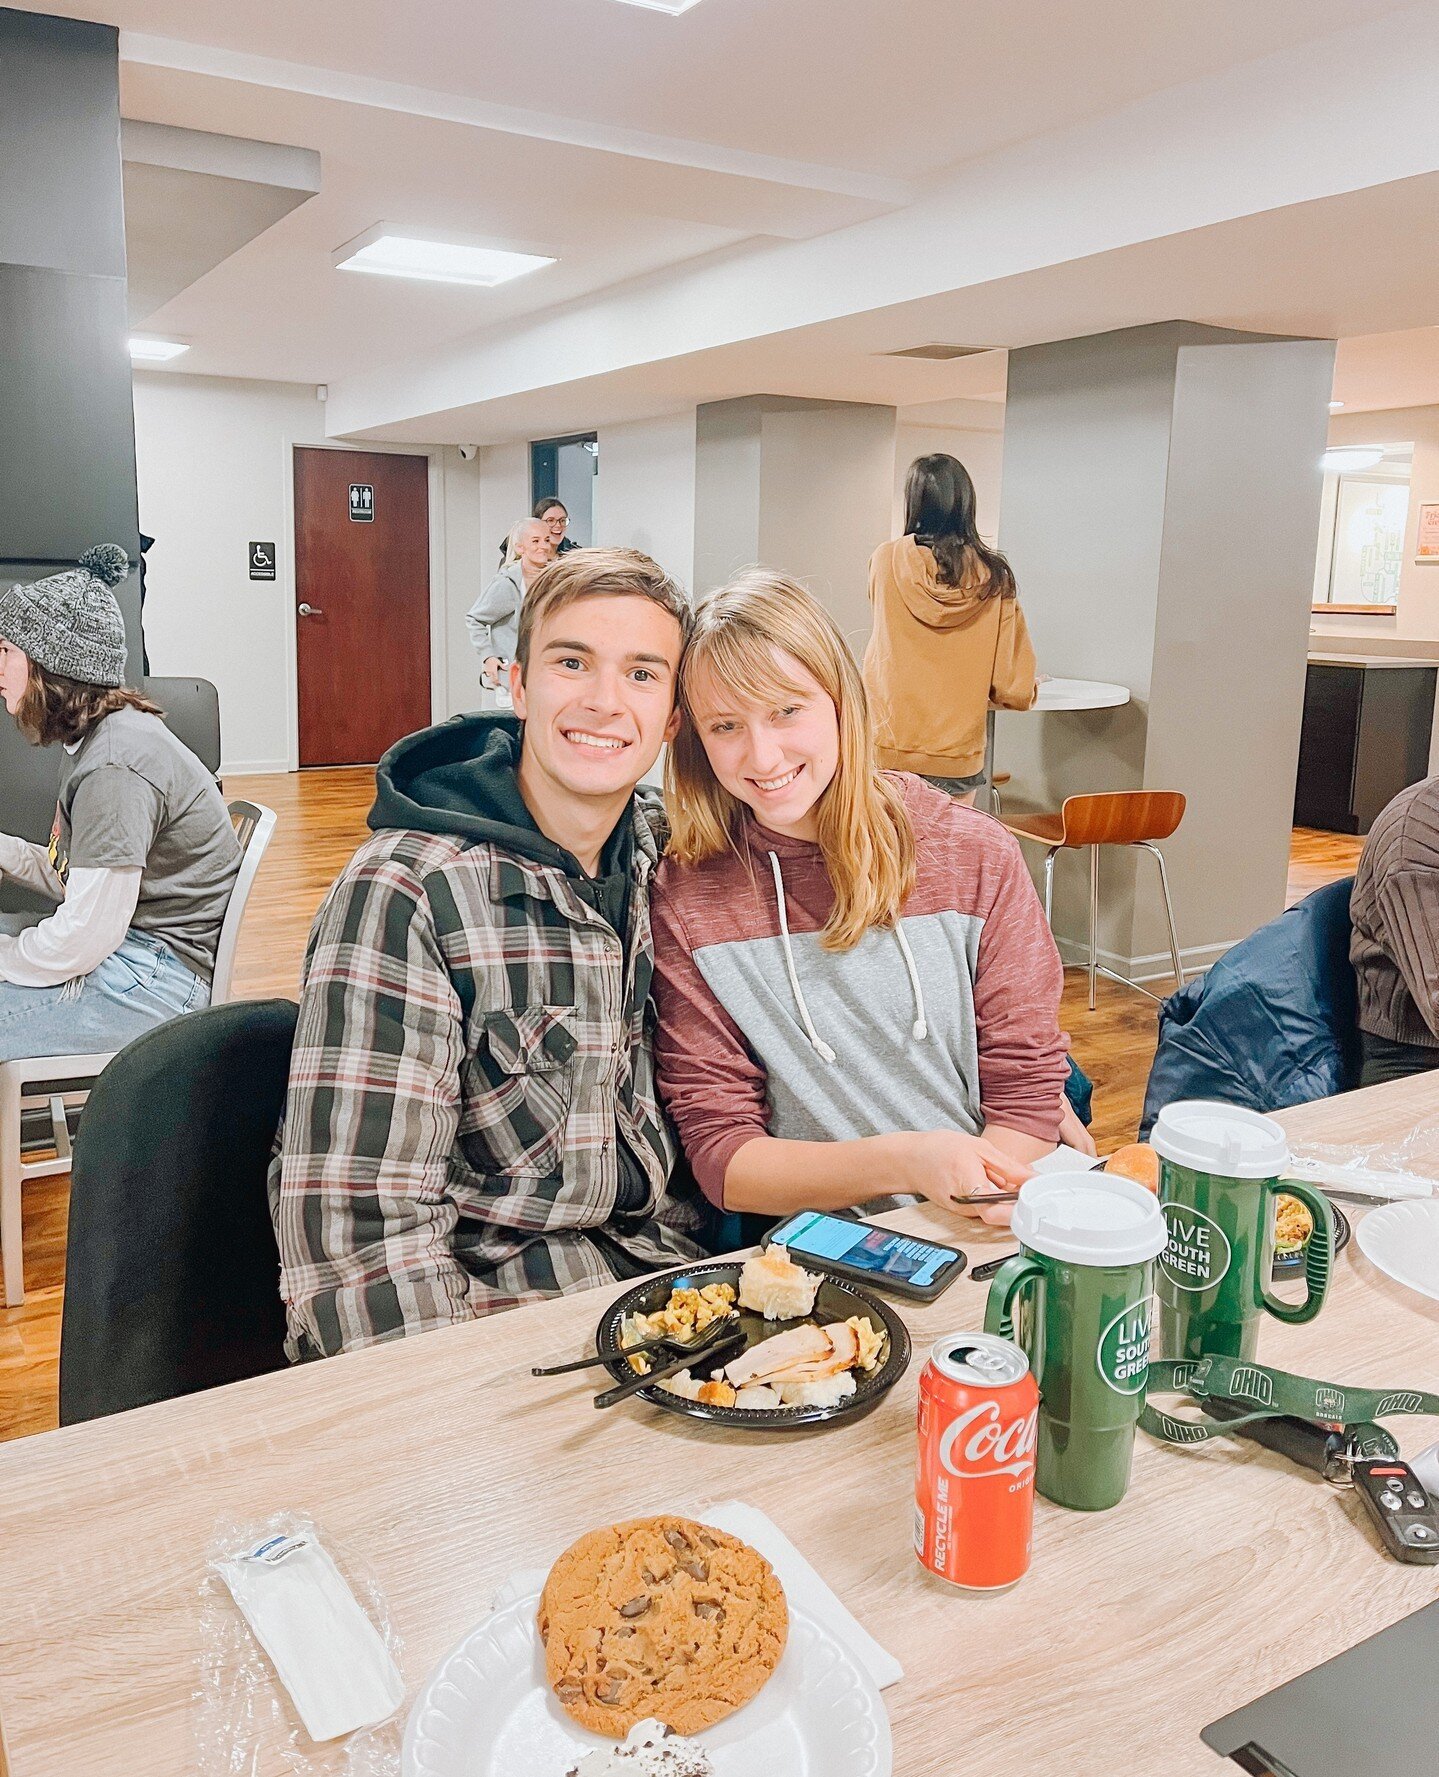 At River Park we Love our residents and we Love hosting events! 💚⁠
⁠
Wether your a new or existing resident, we want to hear what you may like to see or what has been your favorite event so far!